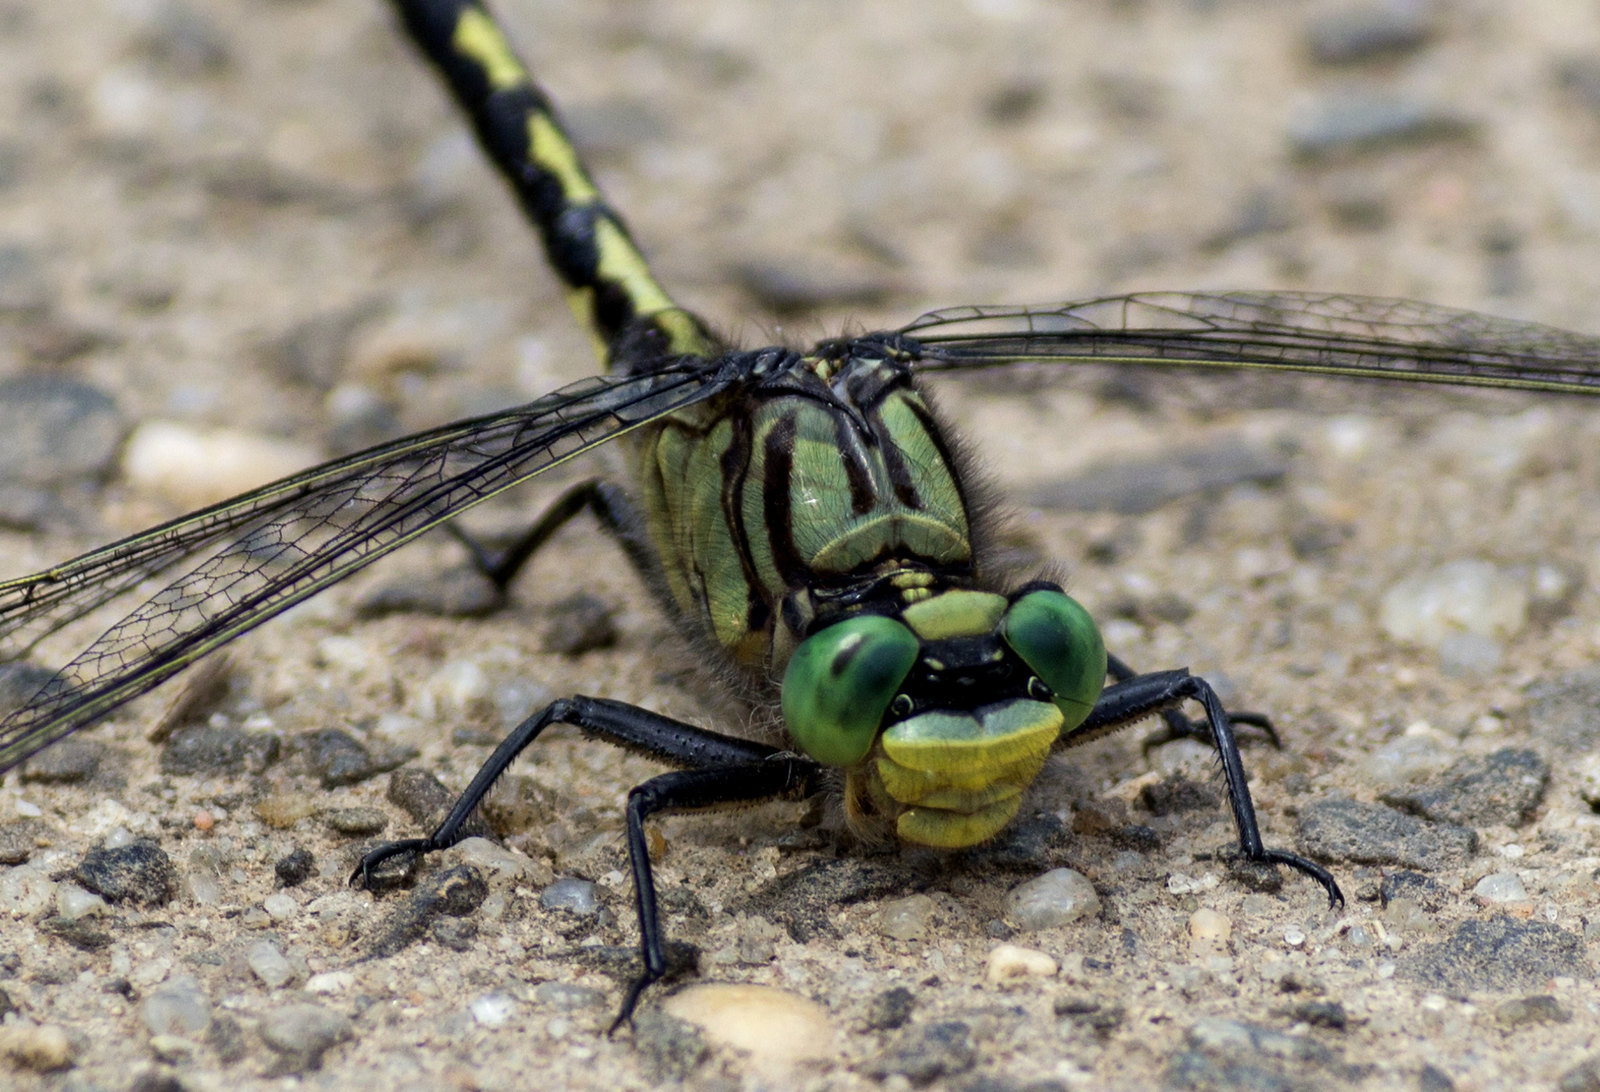 #wildlife #color #bug #dragonfly #insect #nature   #canon #t5i #dslr #700d #camera #shot #beautiful